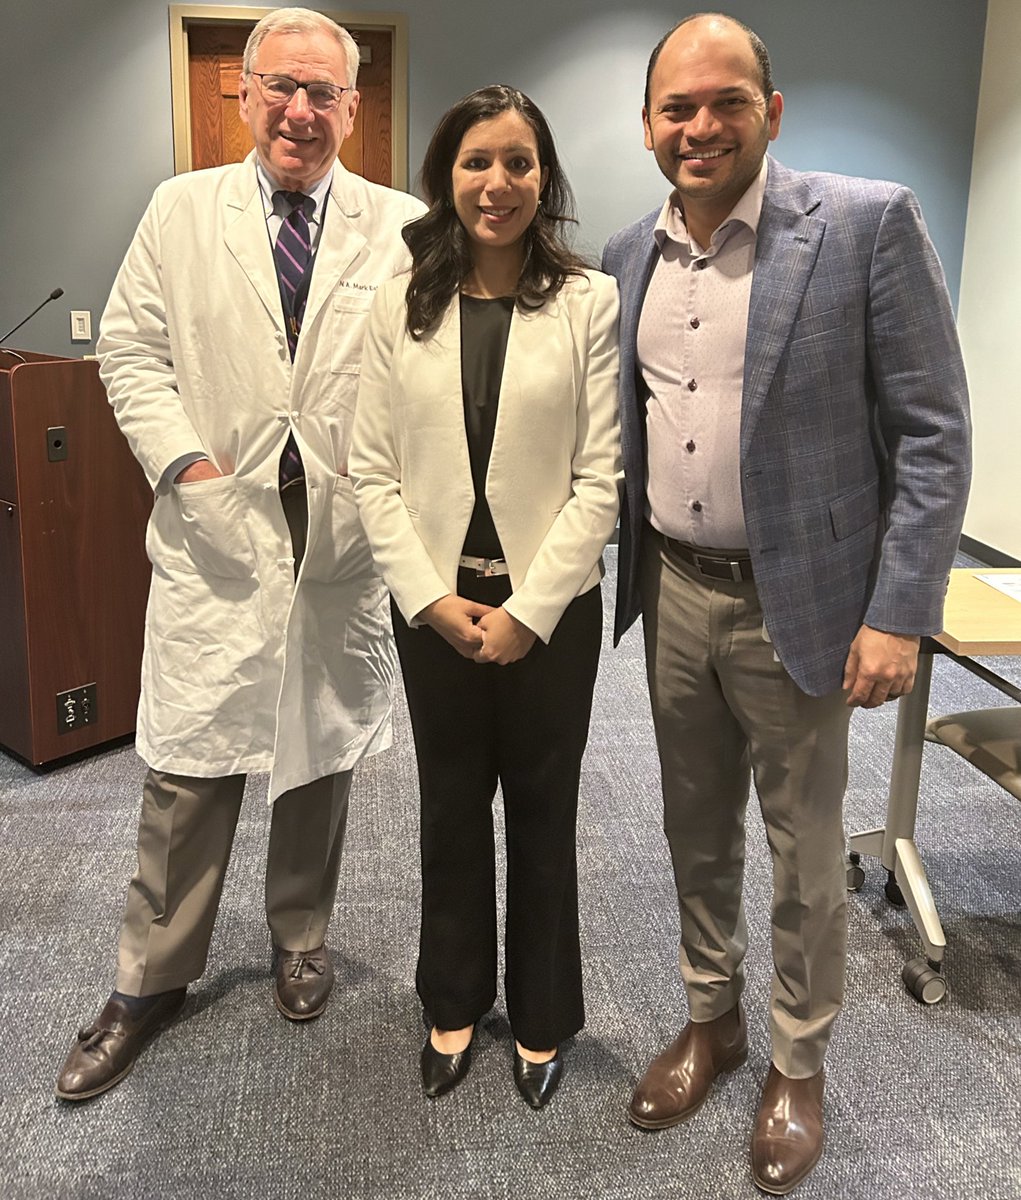 We welcomed @AmiBhattMD Chief Innovation Officer at the American College of Cardiology, this morning. She presented on “A Commitment to Collaborative Intelligence in Cardiovascular Care” @KBerlacher @saba_sfs3 @ahoskoppal @ACCinTouch @PittCardiology @UPMCPhysicianEd